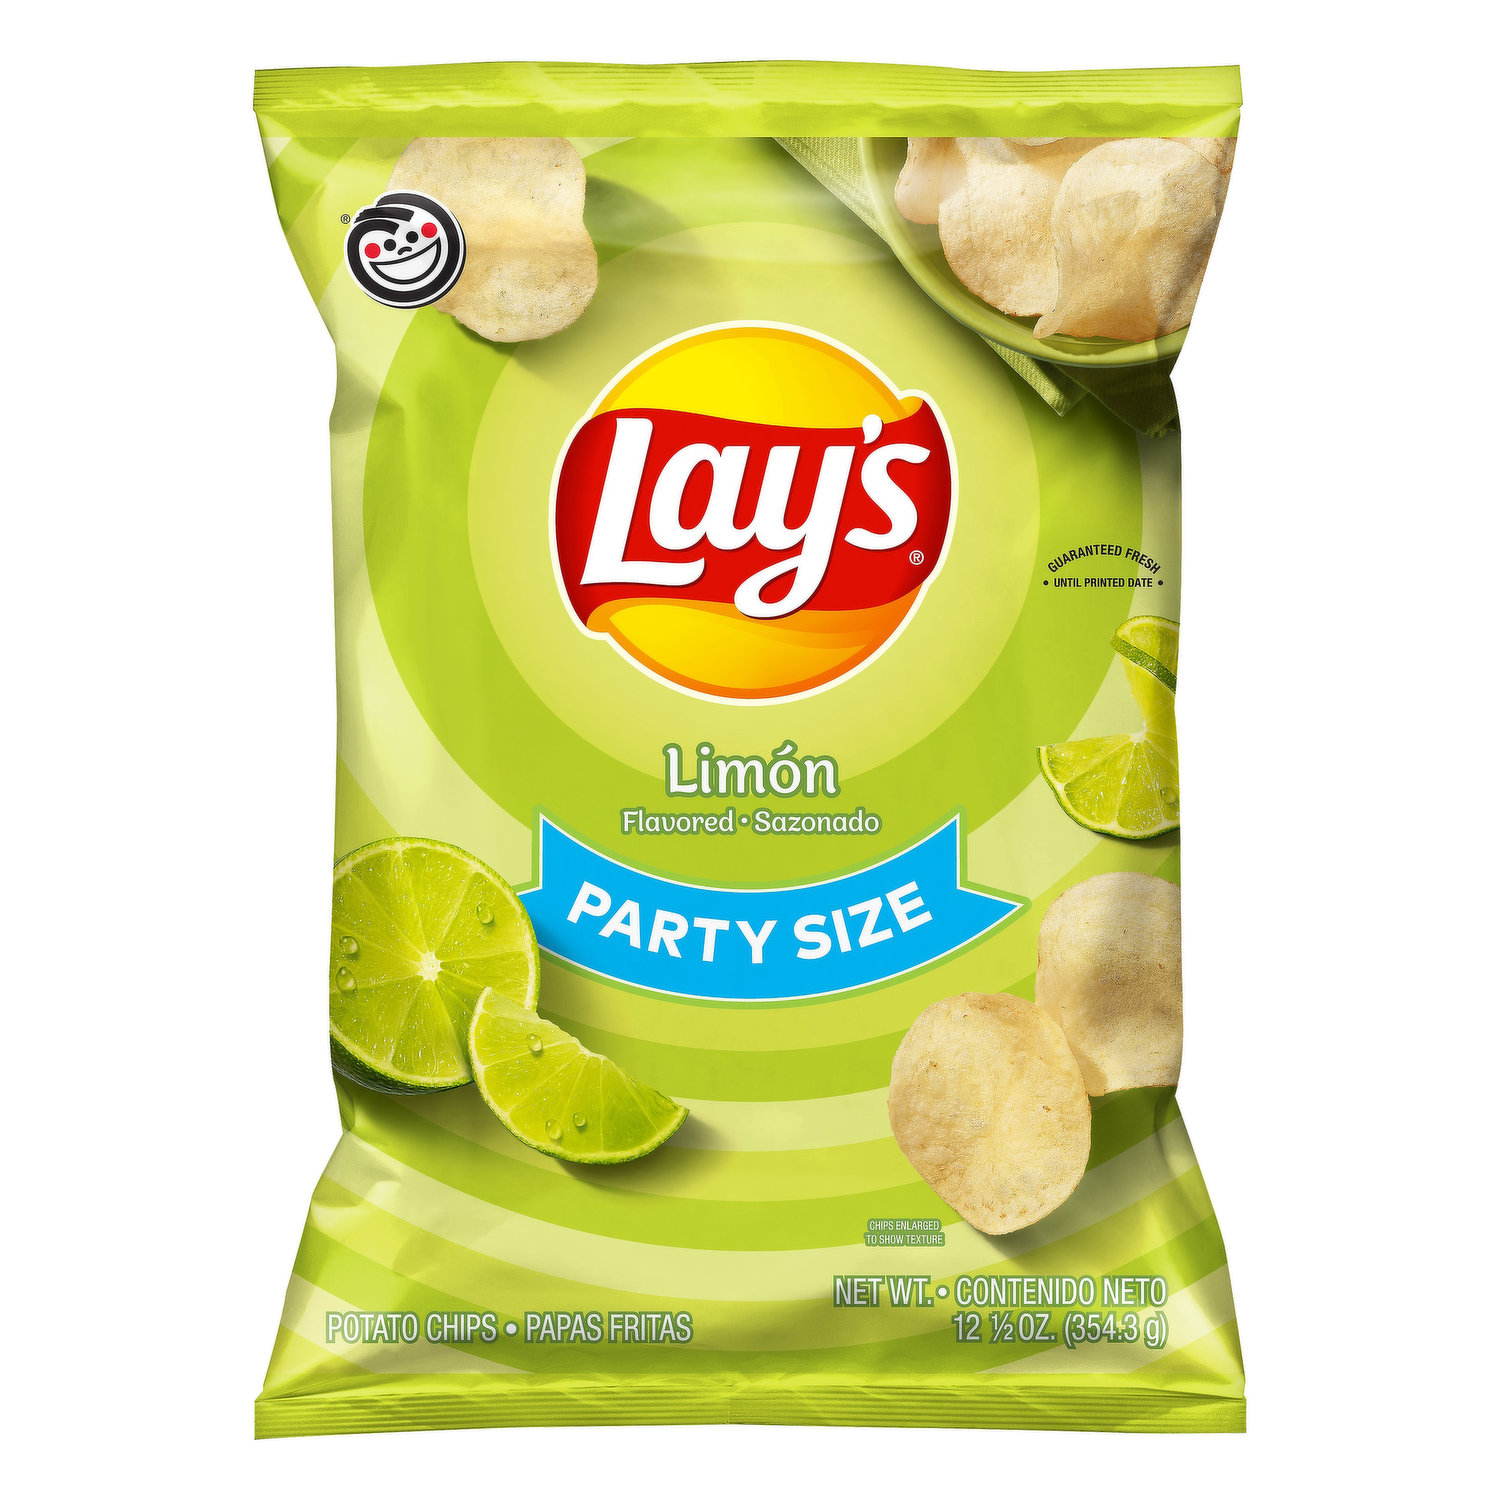 Lay's Potato Chips, Limon Flavored, Party Size - Super 1 Foods